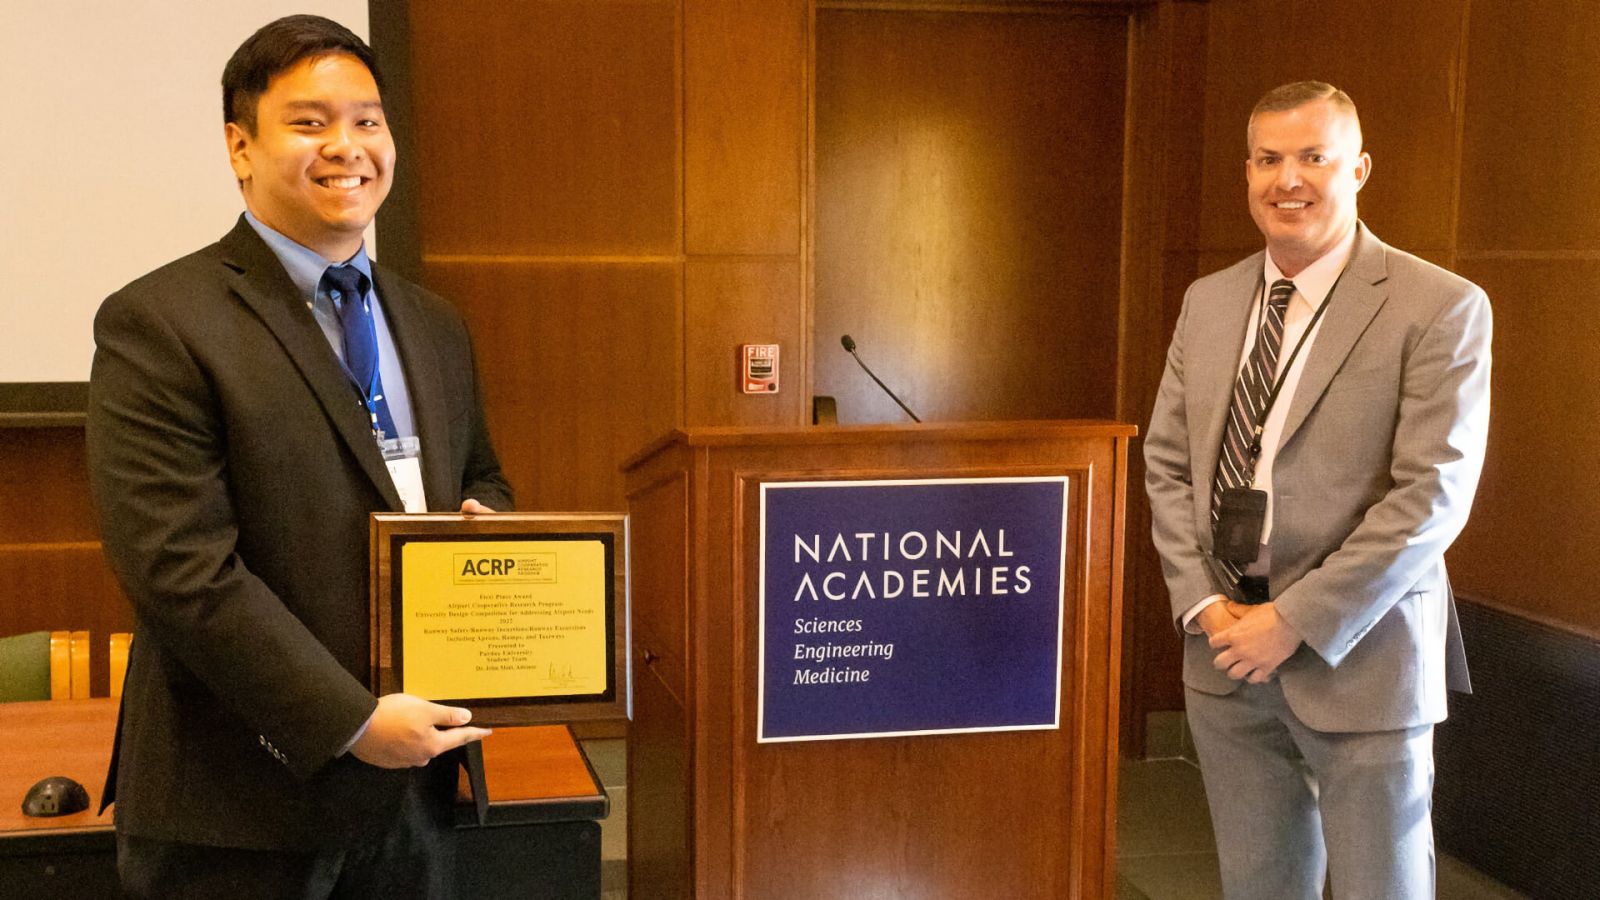 Luigi Dy (left), accepts the first-place award for the Runway Safety Challenge area in the Airport Cooperative Research Program's University Design Competition for Addressing Airport Needs from Joe Winingar, acting director of safety, Air Traffic Organization, Federal Aviation Administration (FAA) , at an award ceremony at the National Academy of Sciences building in Washington, DC.  (Photo courtesy of the Virginia Space Grant Consortium)